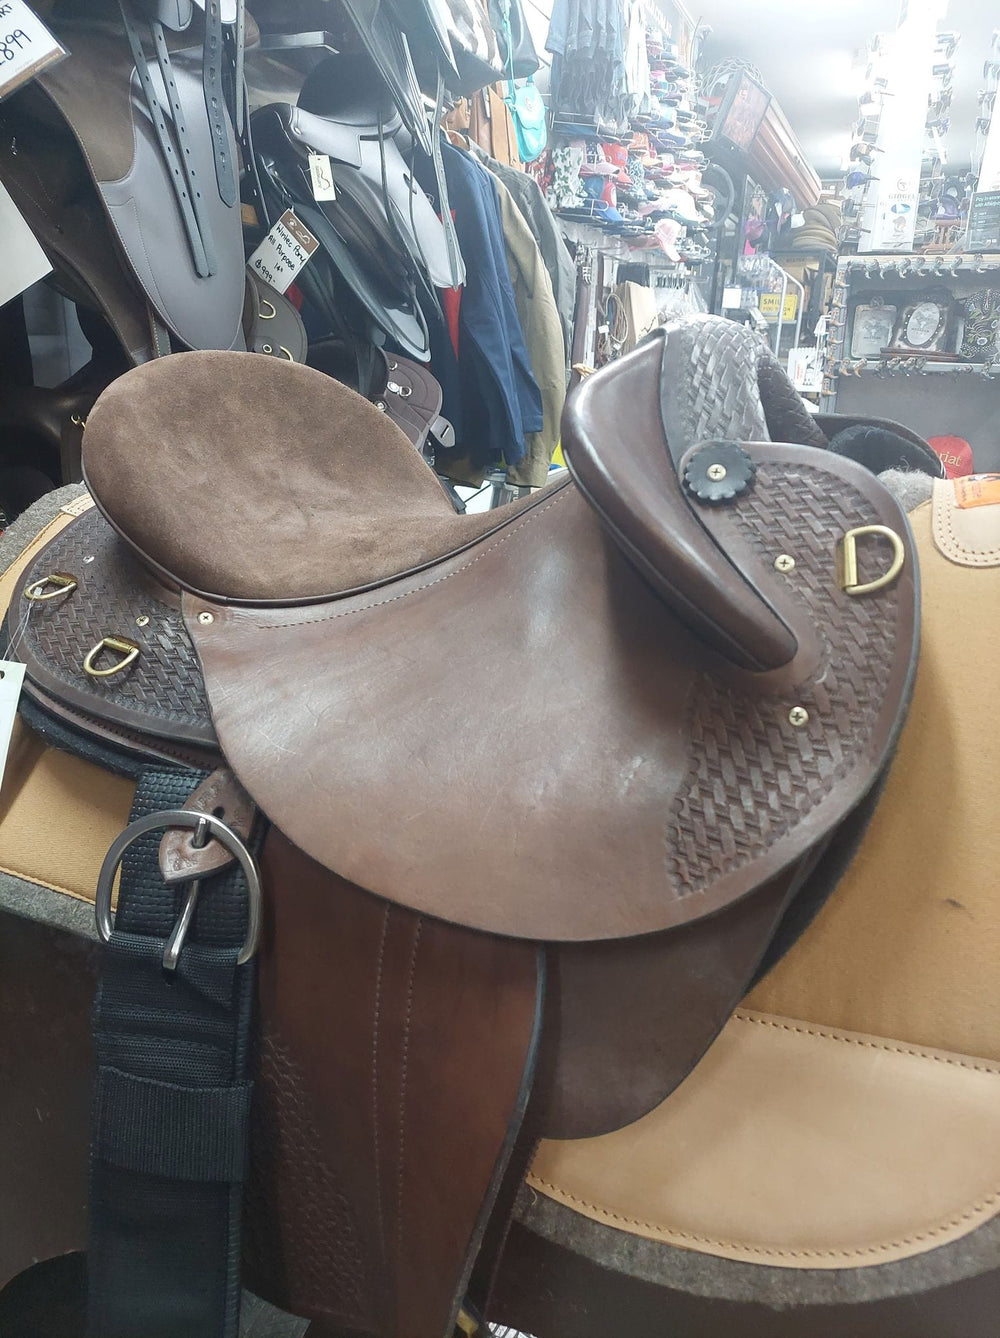 Southern Cross Saddles 16.5in SQHB / Brown Southern Cross Competition Half Breed Saddle with Basket Weave Stamp